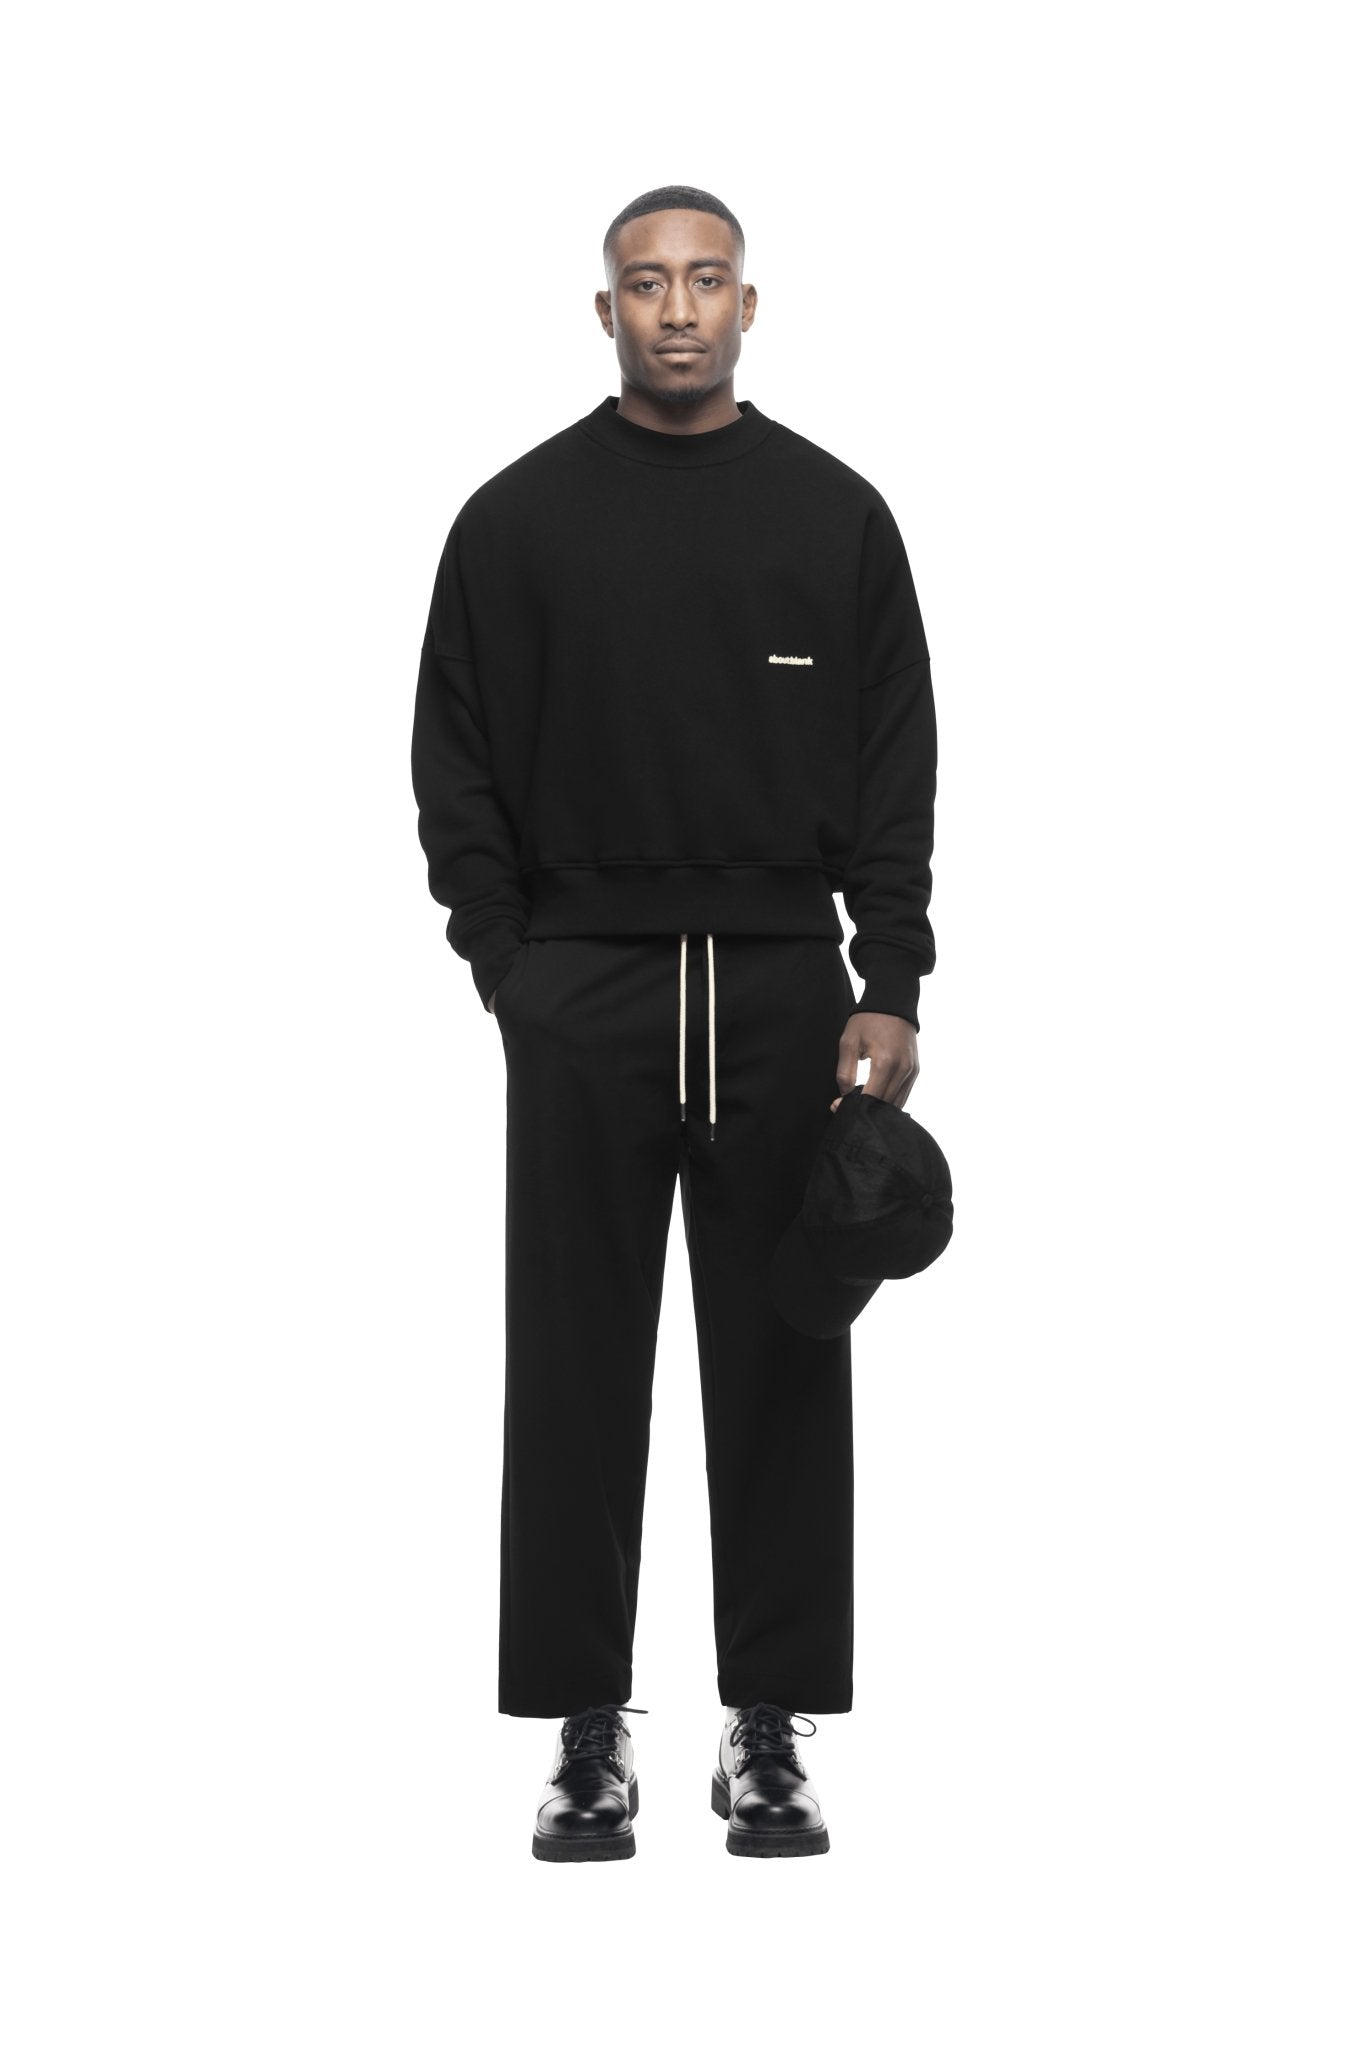 about---blank.comcropped trousers black